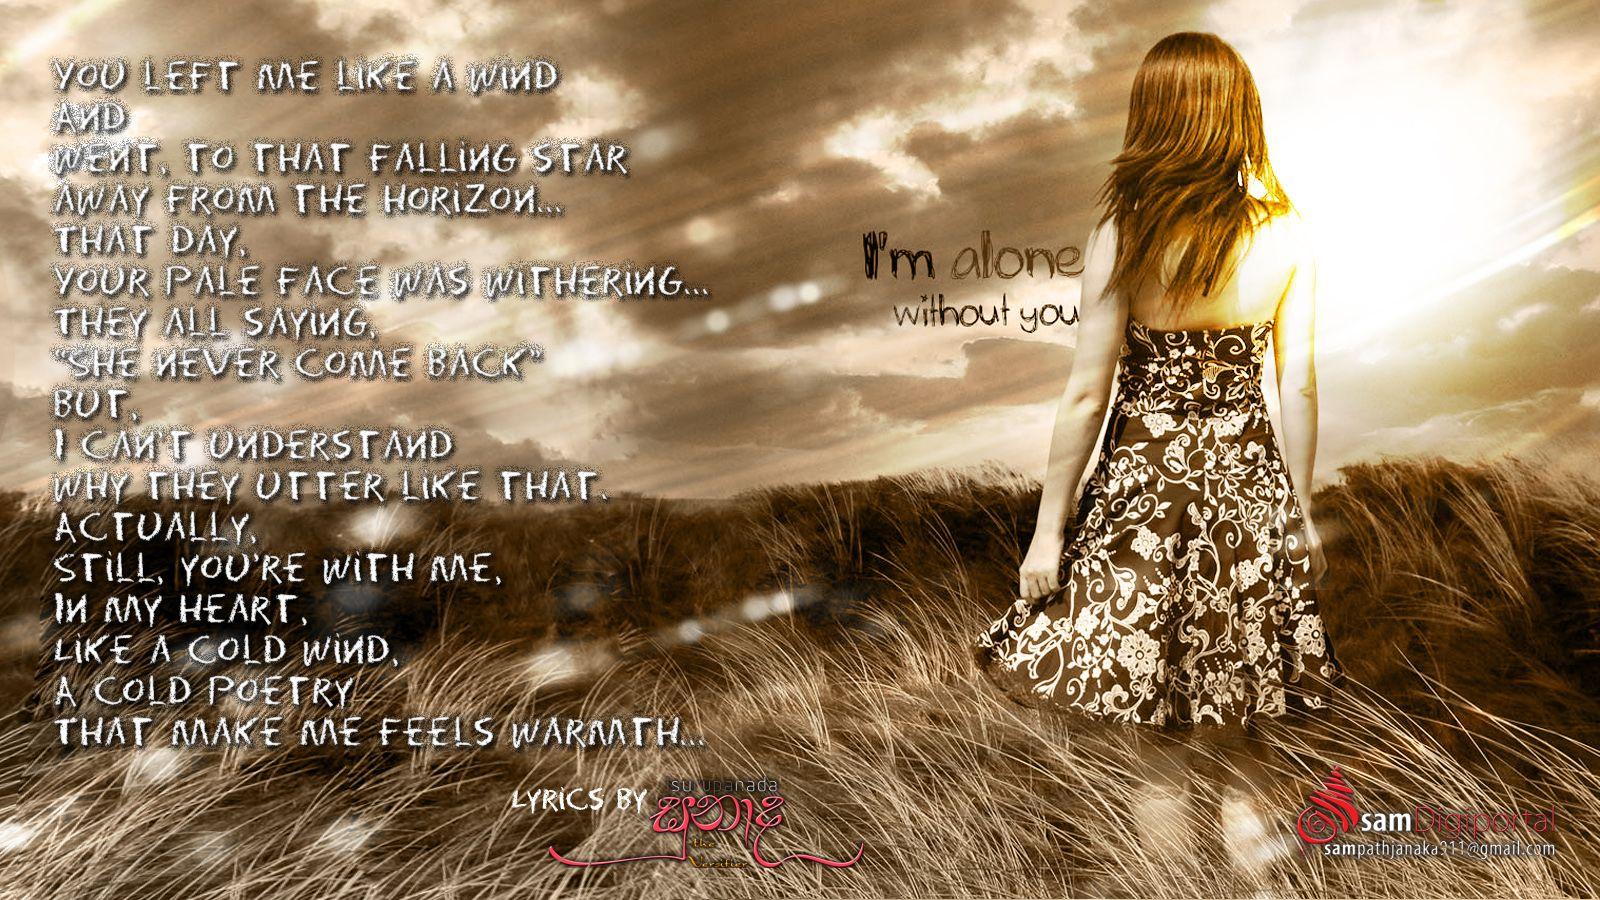 sam Digiportal: I'm alone without You HD wallpaper 1600X900